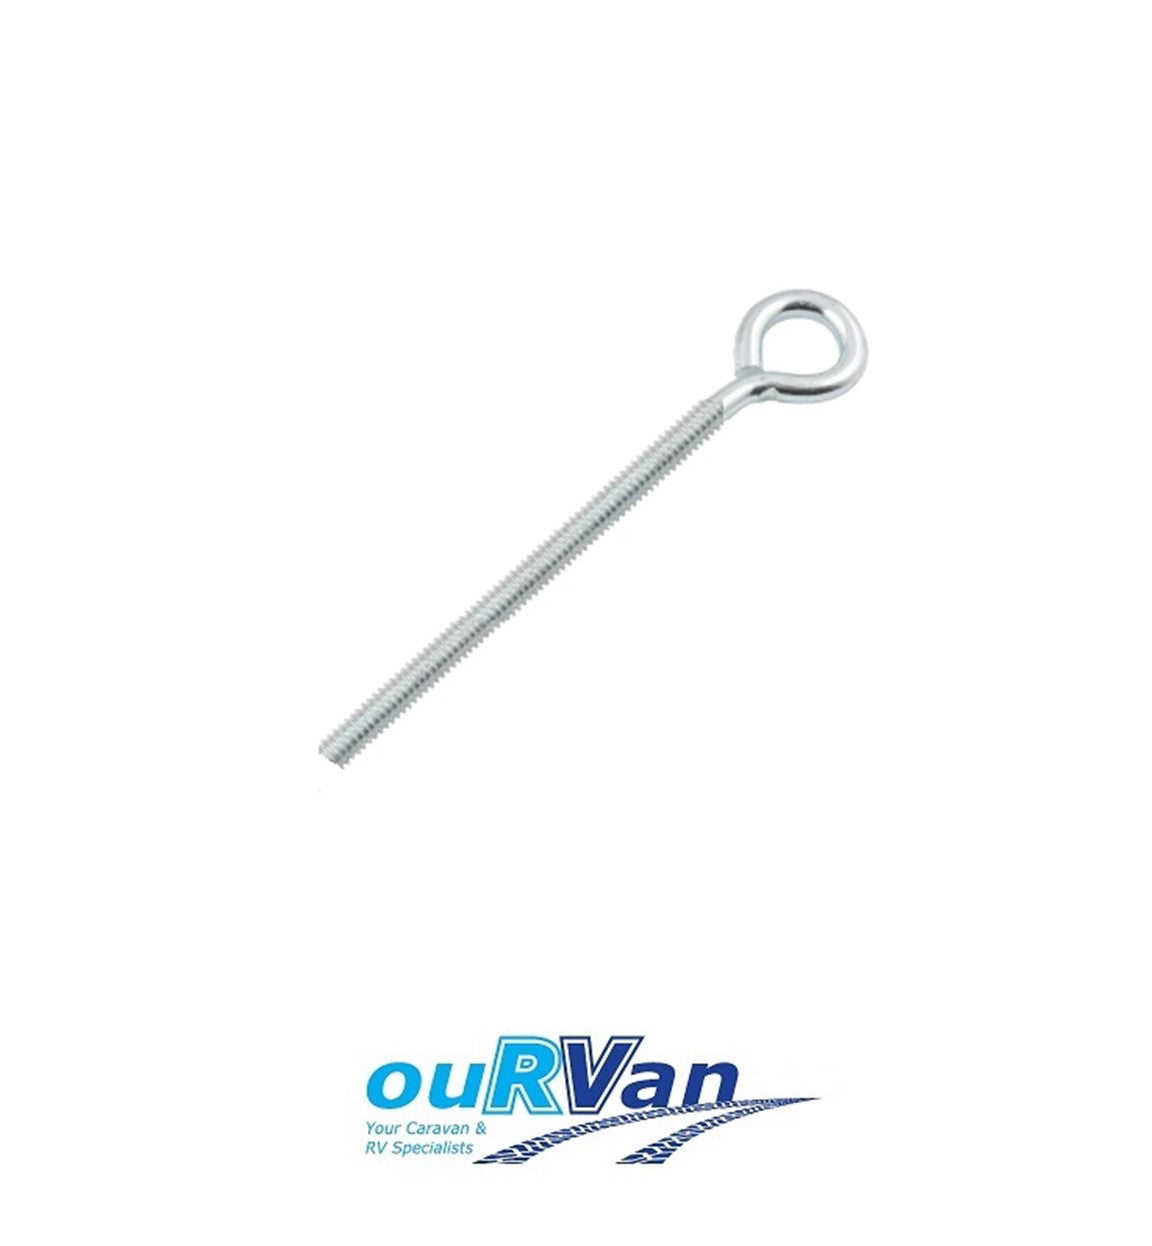 EYEBOLT TO SUIT JAYCO CAMPER WINCH FISH PLATE C3124